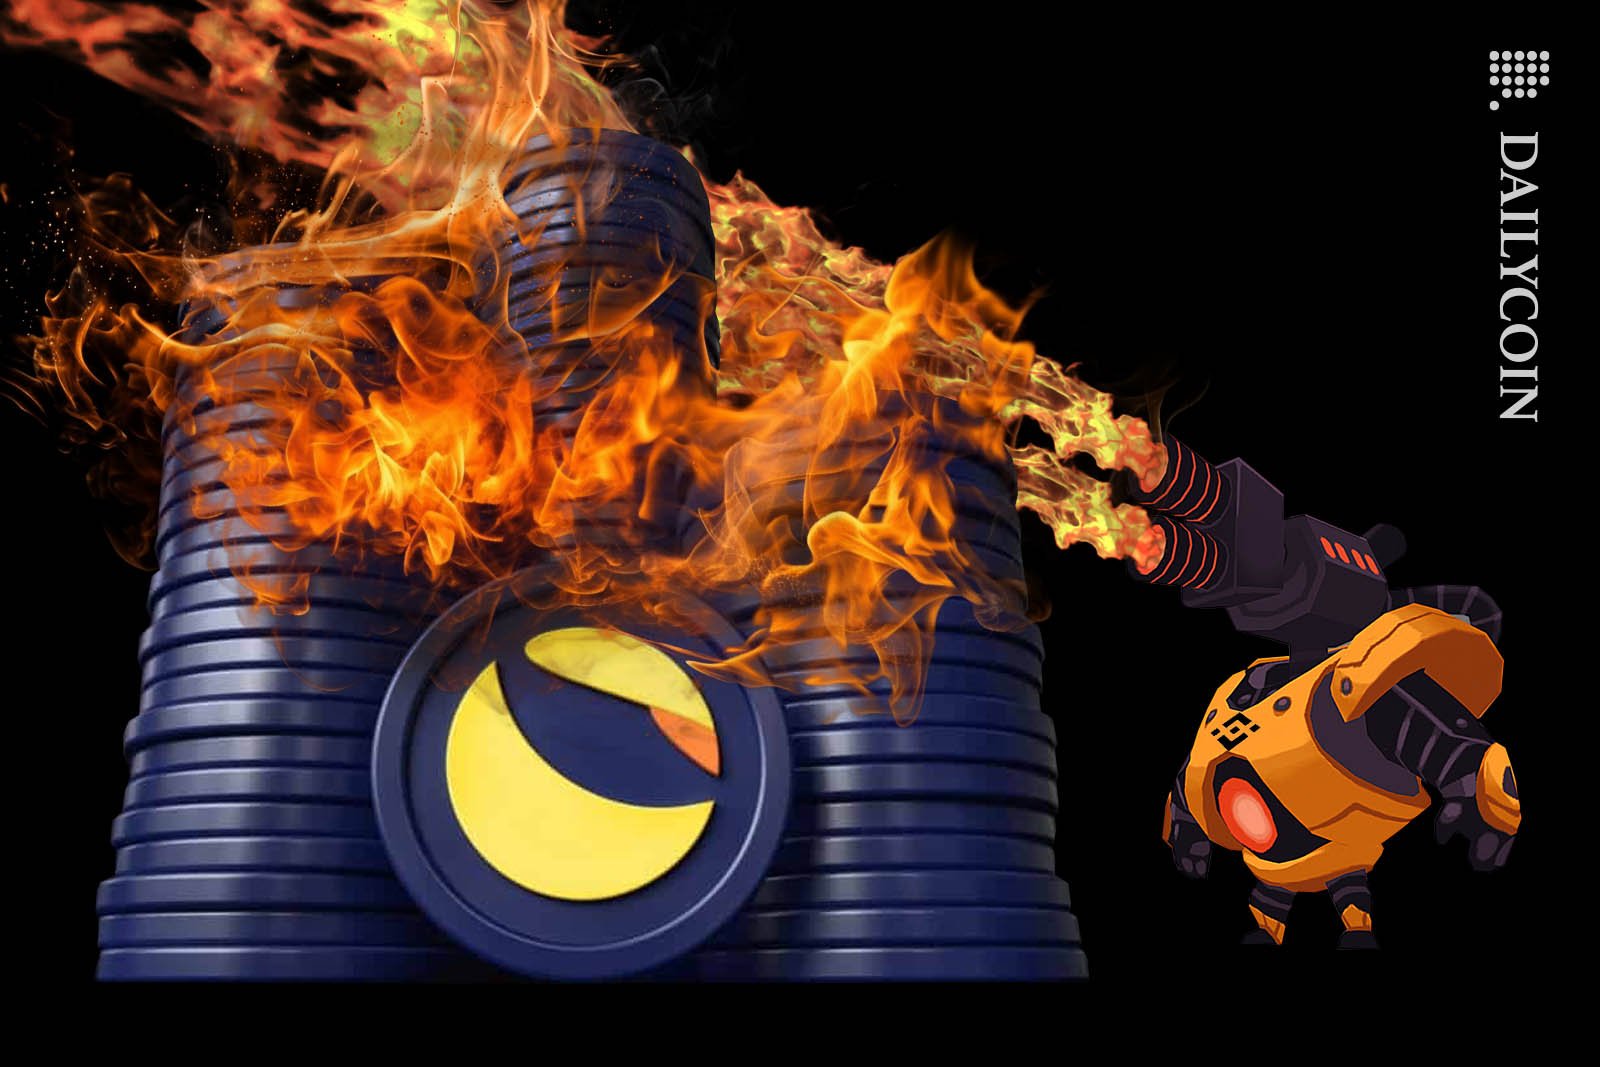 Binance flamethrower robot burning a pile of LUNC coins.